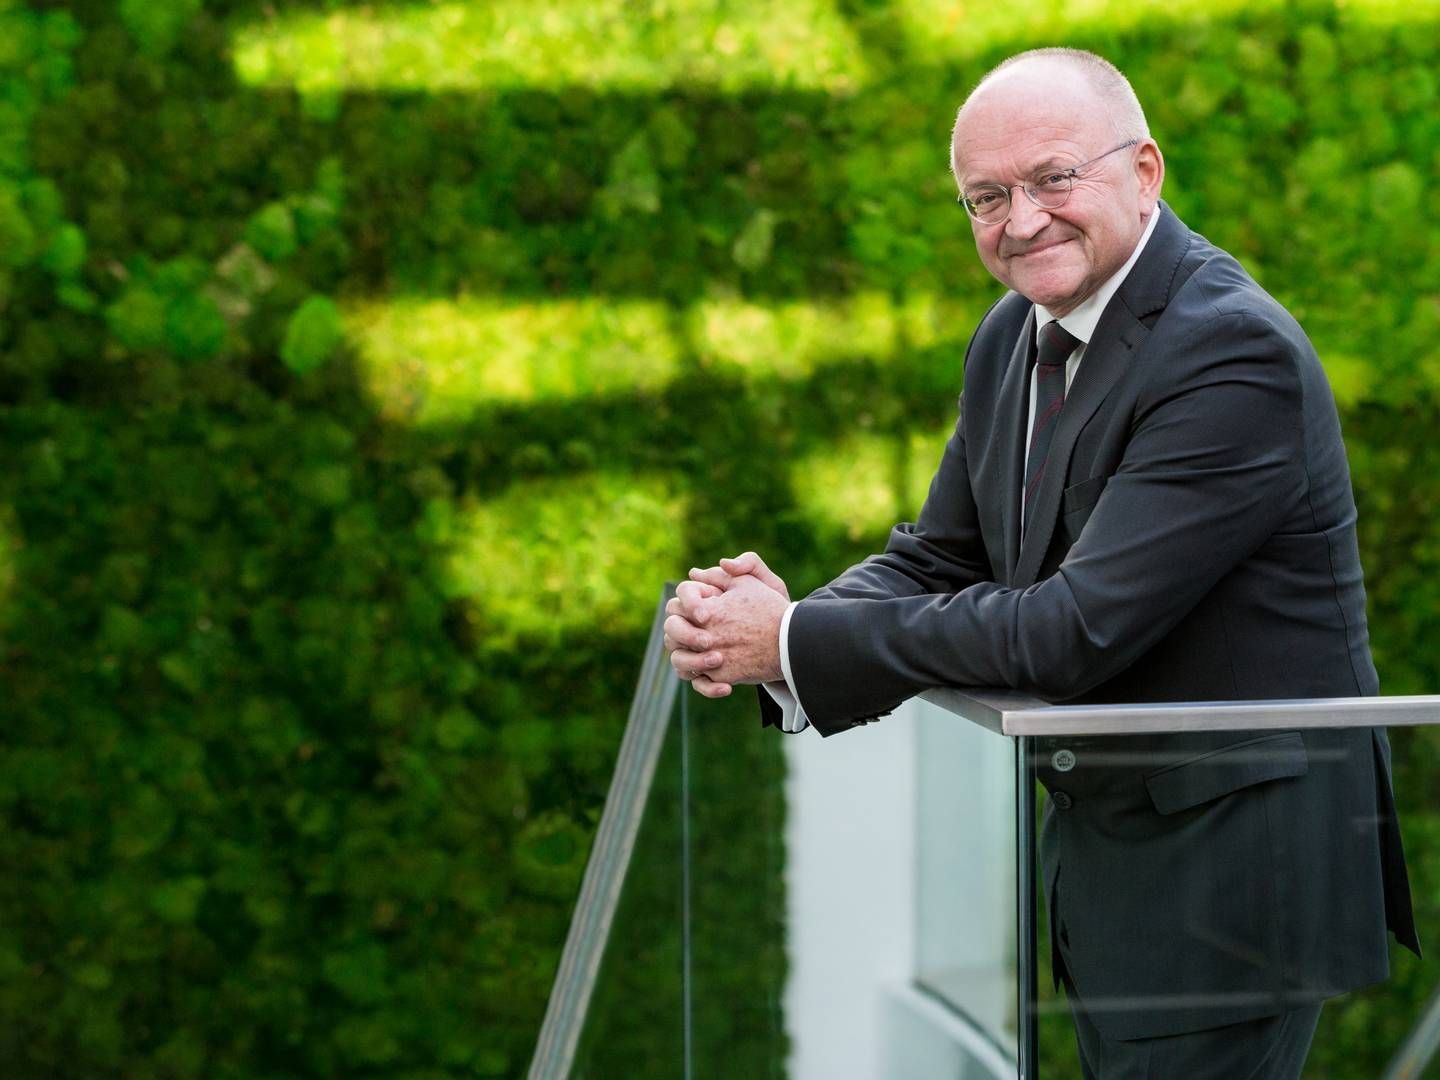 Torben Möger Pedersen, who helped found PensionDanmark, is now bidding the pension fund farewell after 30 years as CEO | Photo: Ursula Bach/ Pensiondanmark